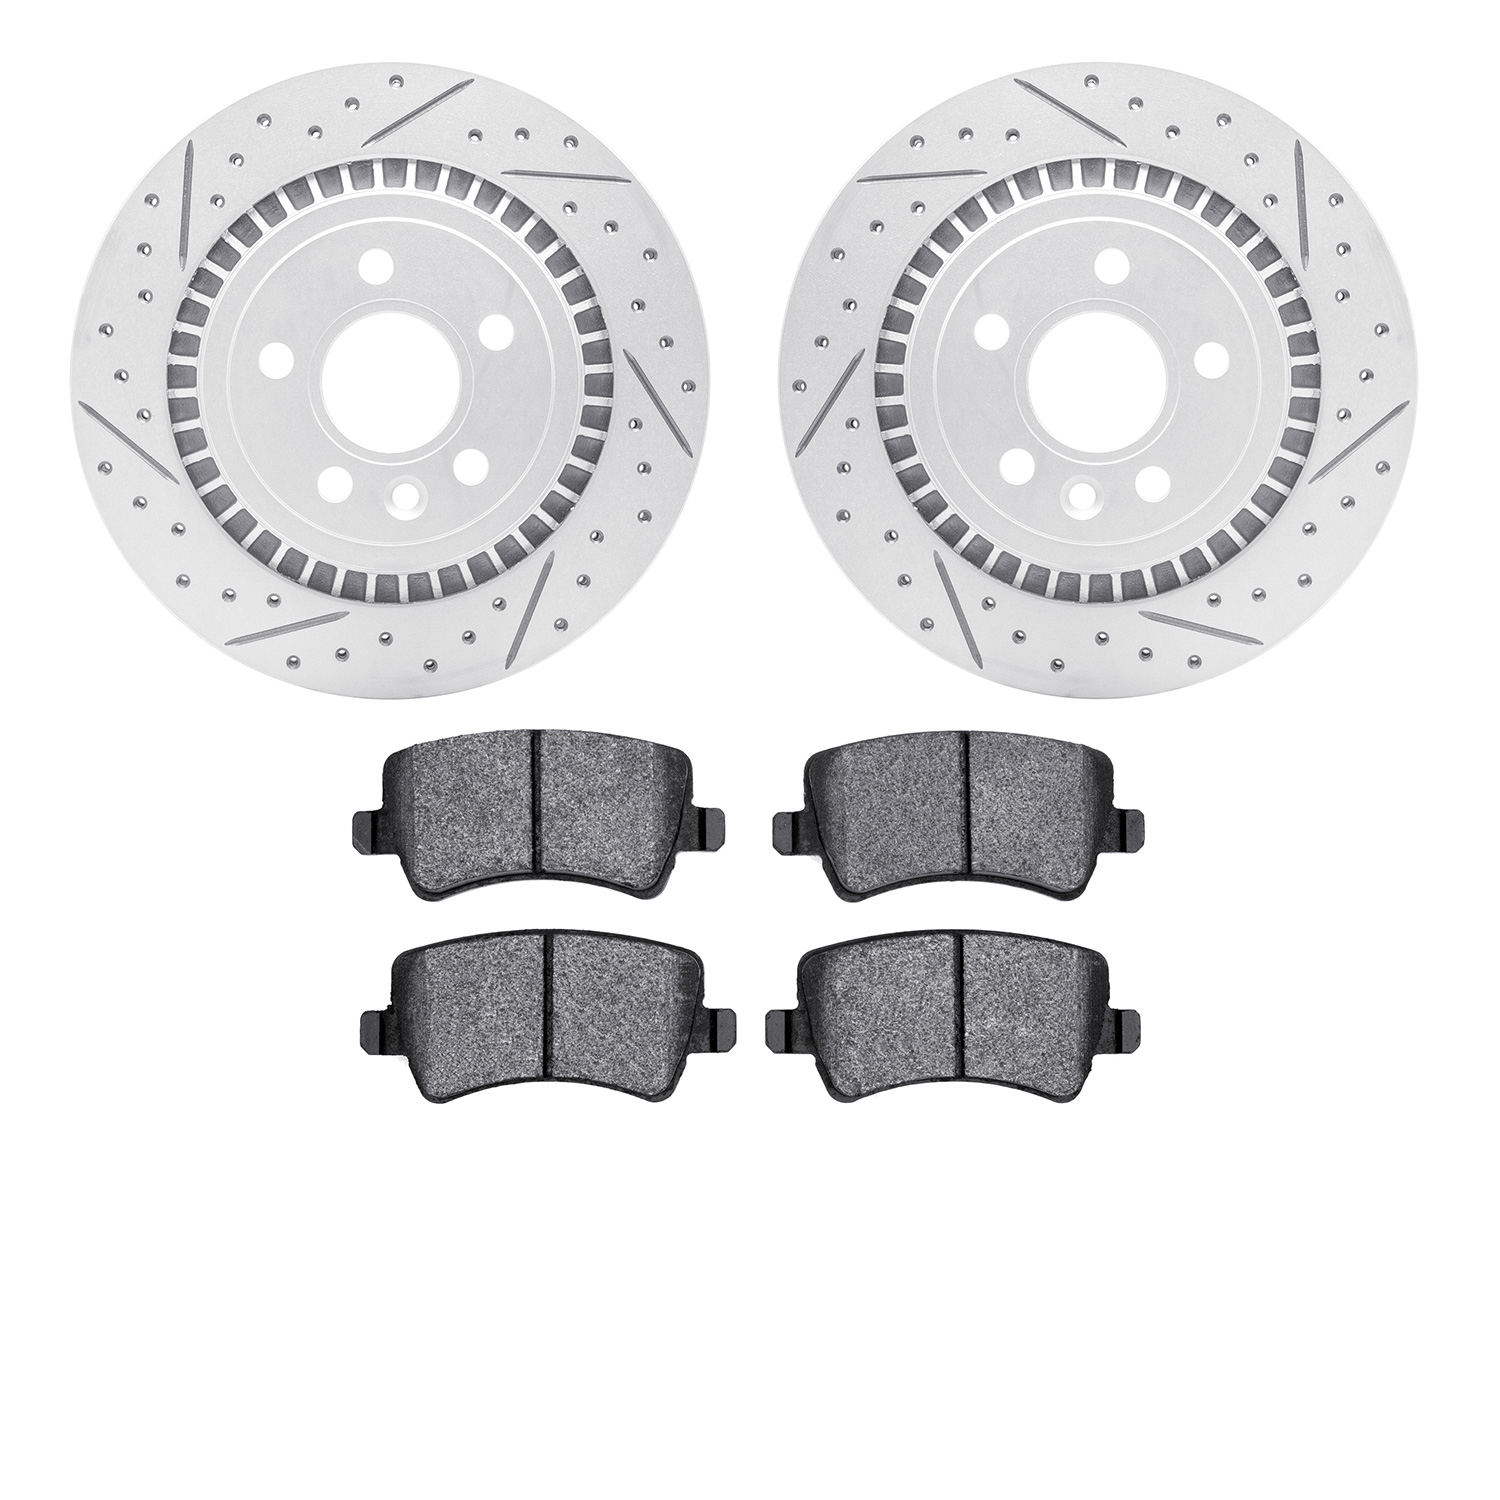 2502-27046 Geoperformance Drilled/Slotted Rotors w/5000 Advanced Brake Pads Kit, 2008-2018 Volvo, Position: Rear